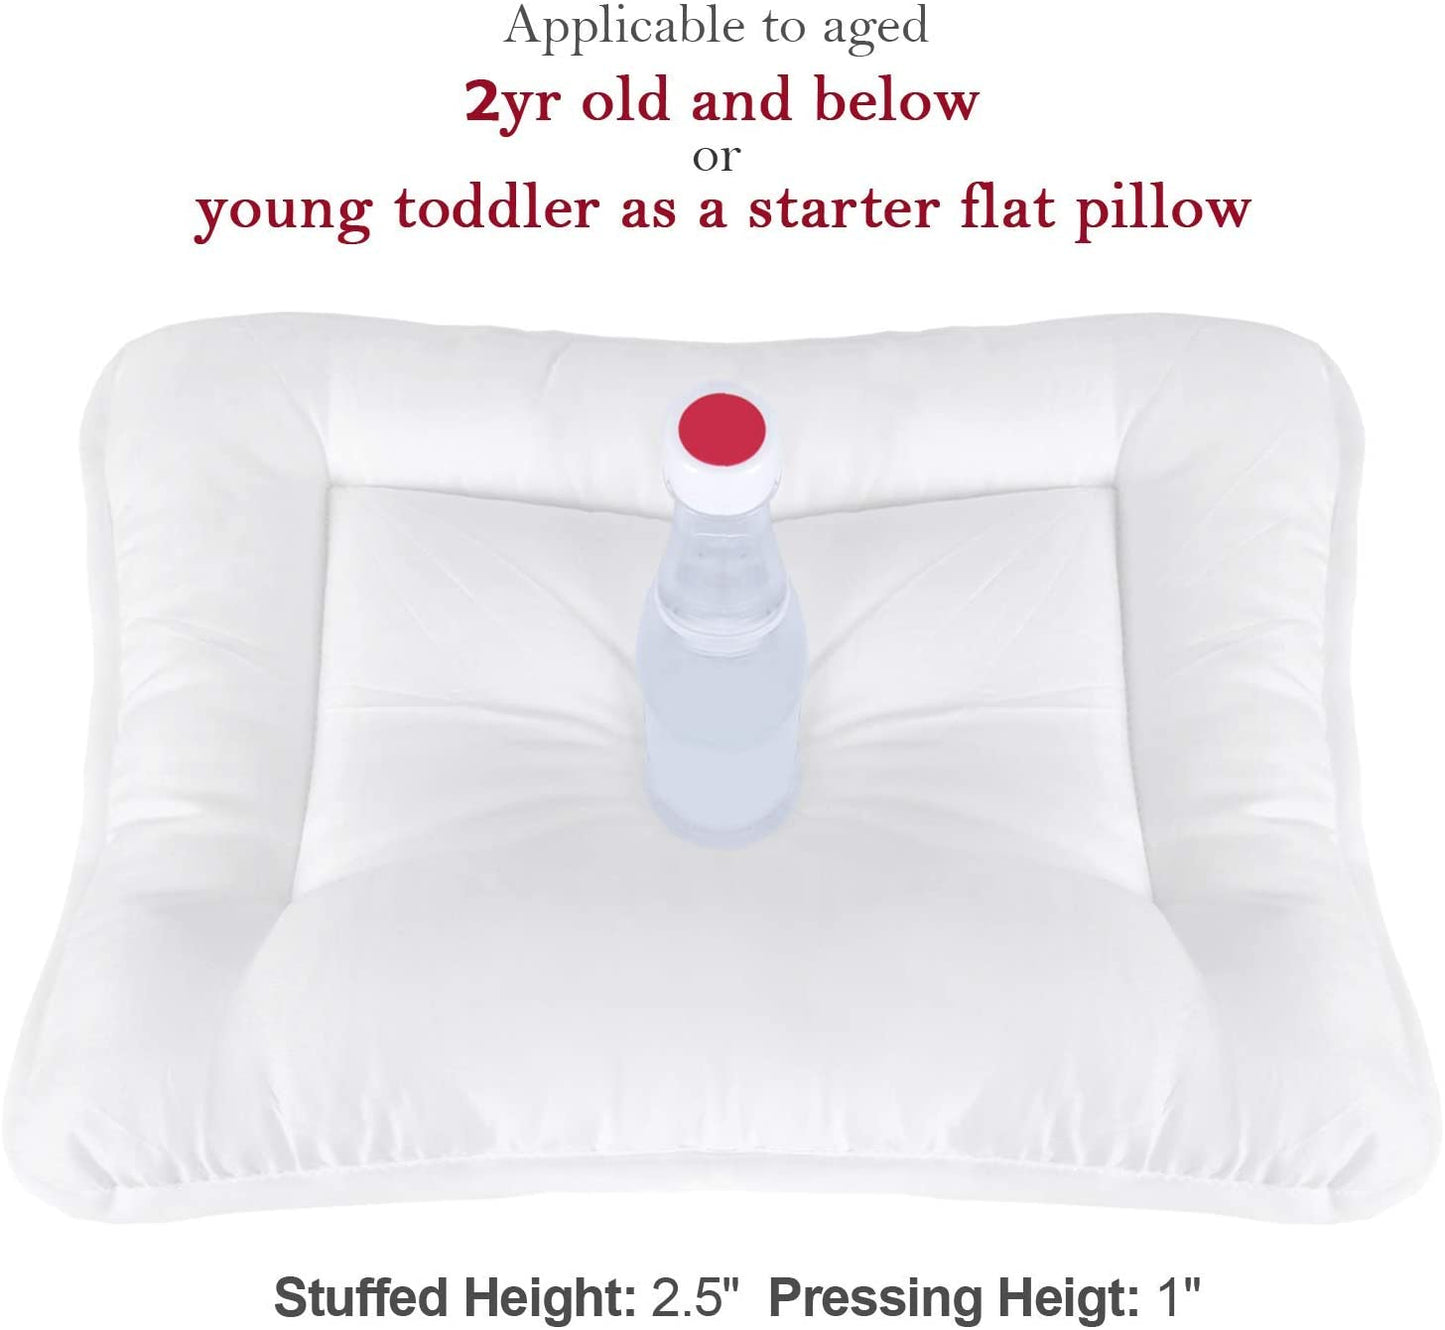 Toddler Pillow Quilted with Pillowcase - 13" x 18", 100% Cotton, Ultra Soft & Breathable, Navy